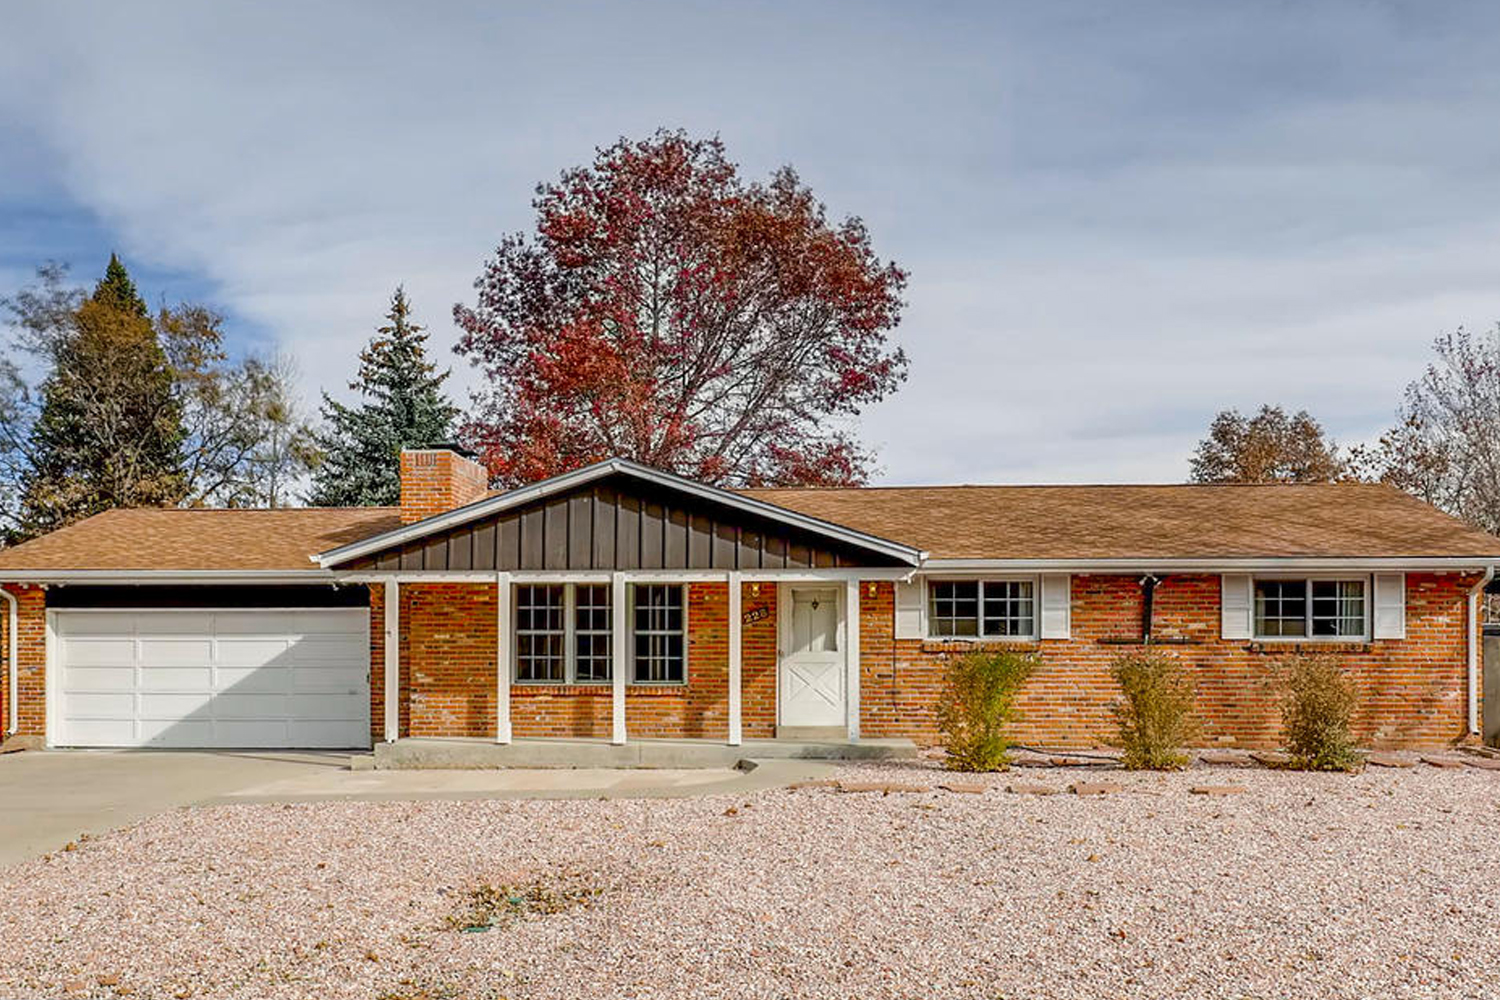 NEW LISTING: 228 Iroquois Dr, Boulder CO 80303 Mountain Views!